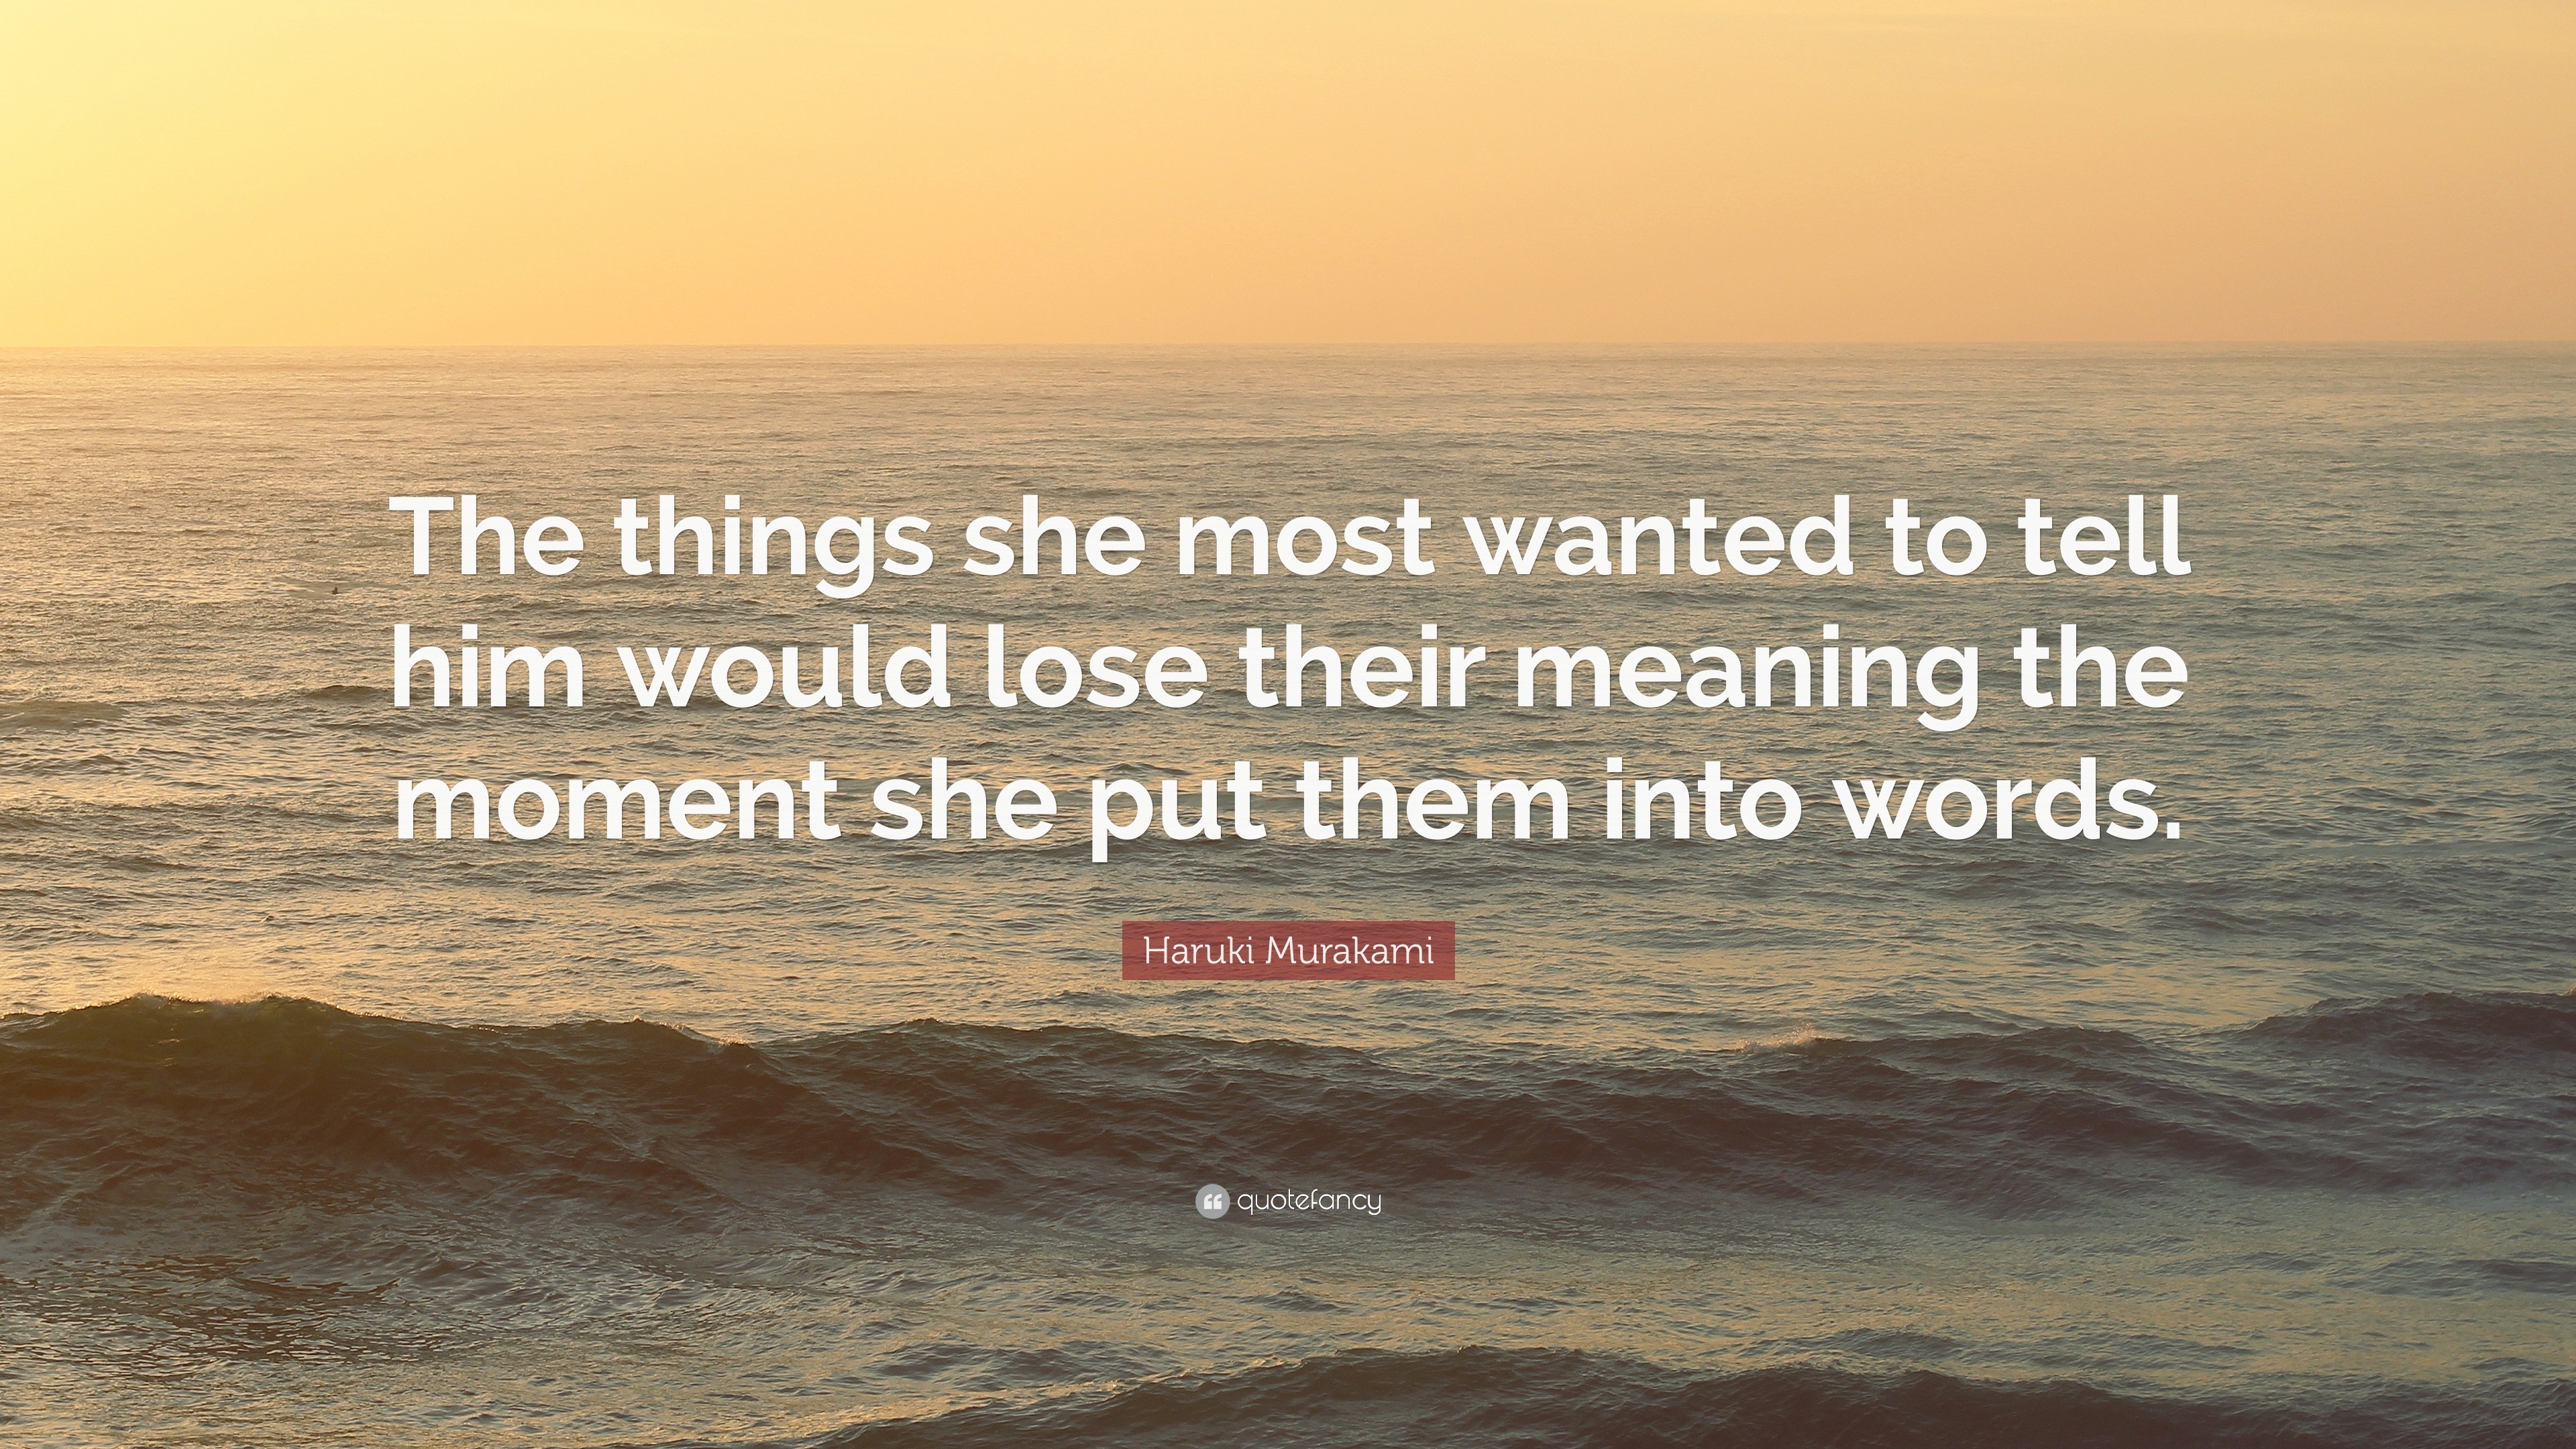 Haruki Murakami Quote: “The things she most wanted to tell him would ...